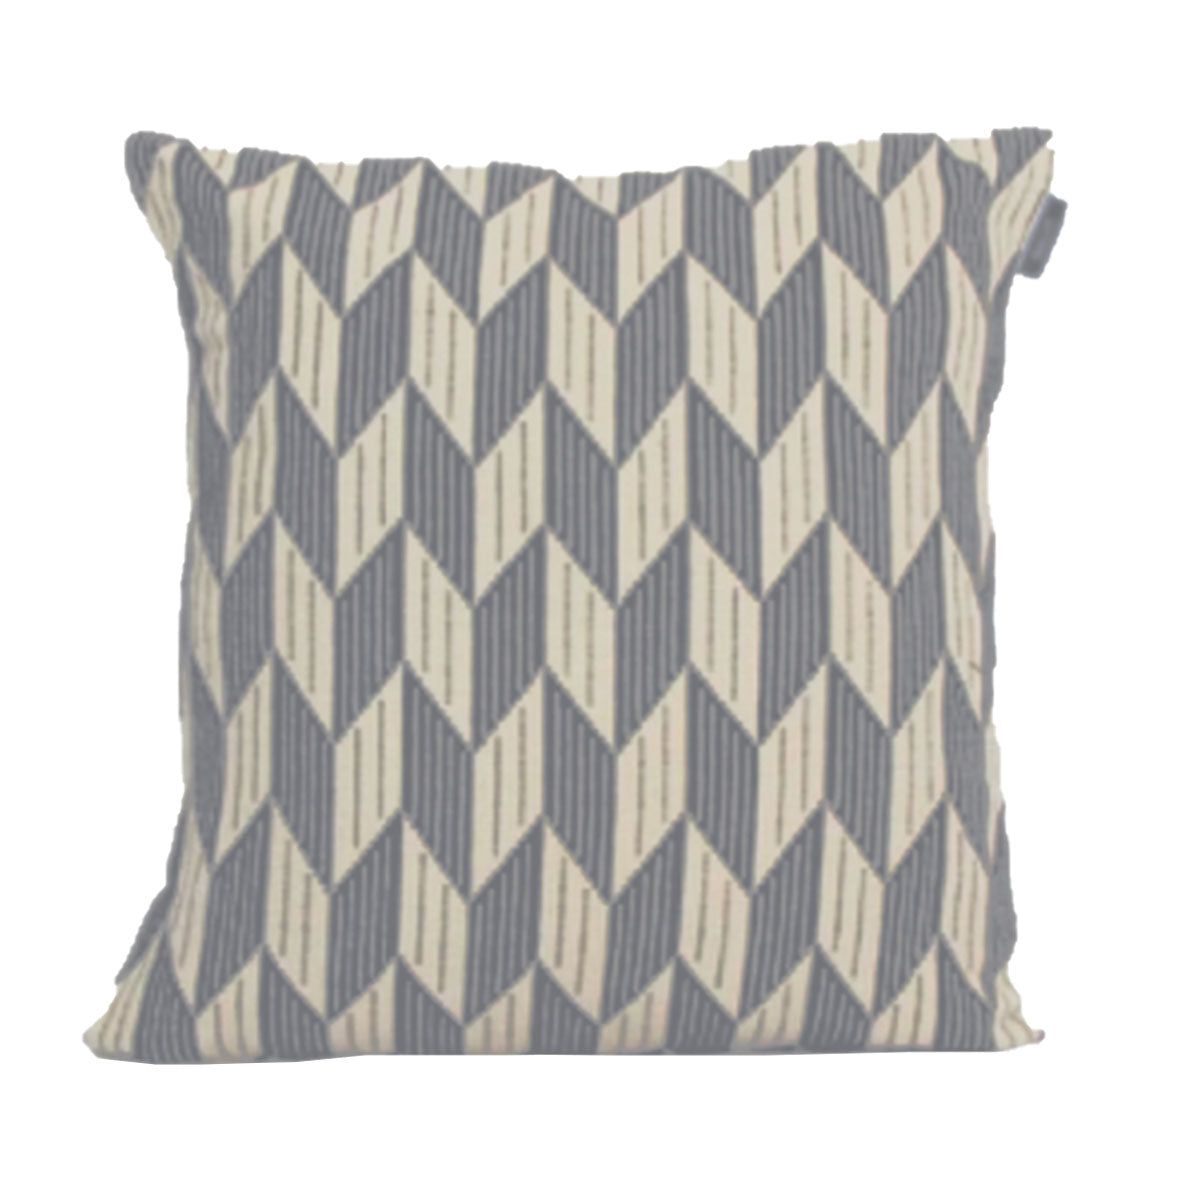 Kayts Pillow Cover - Mid Grey